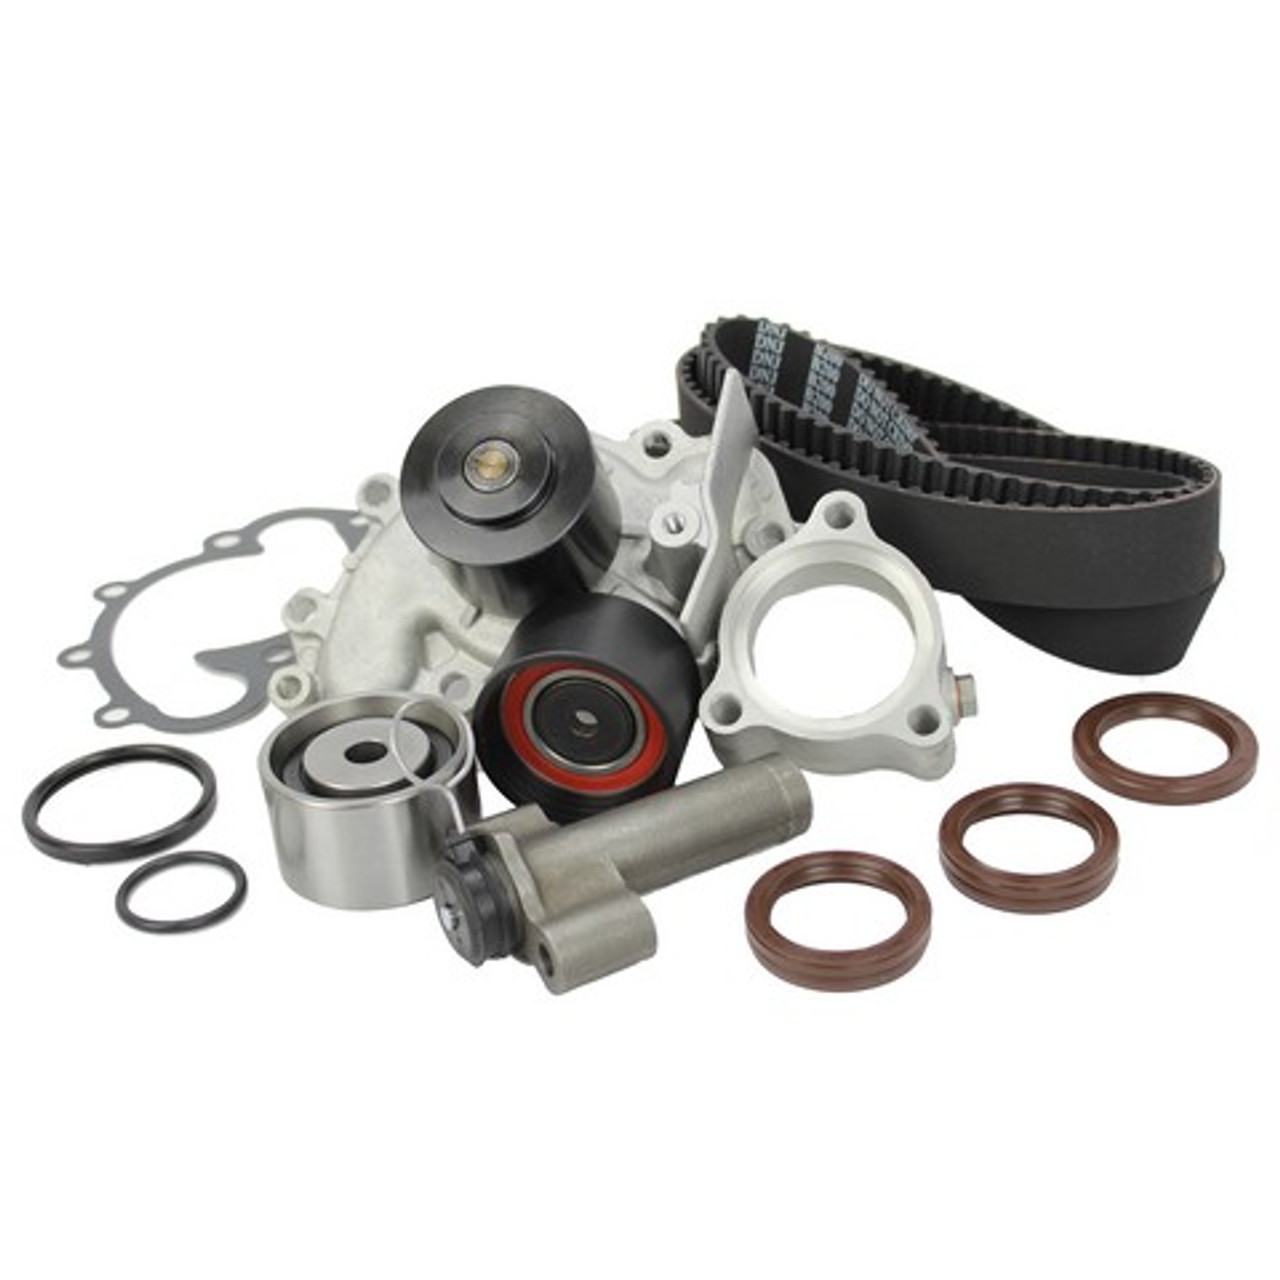 Timing Belt Kit with Water Pump 3.0L 1992 Toyota Camry - TBK958AWP.1